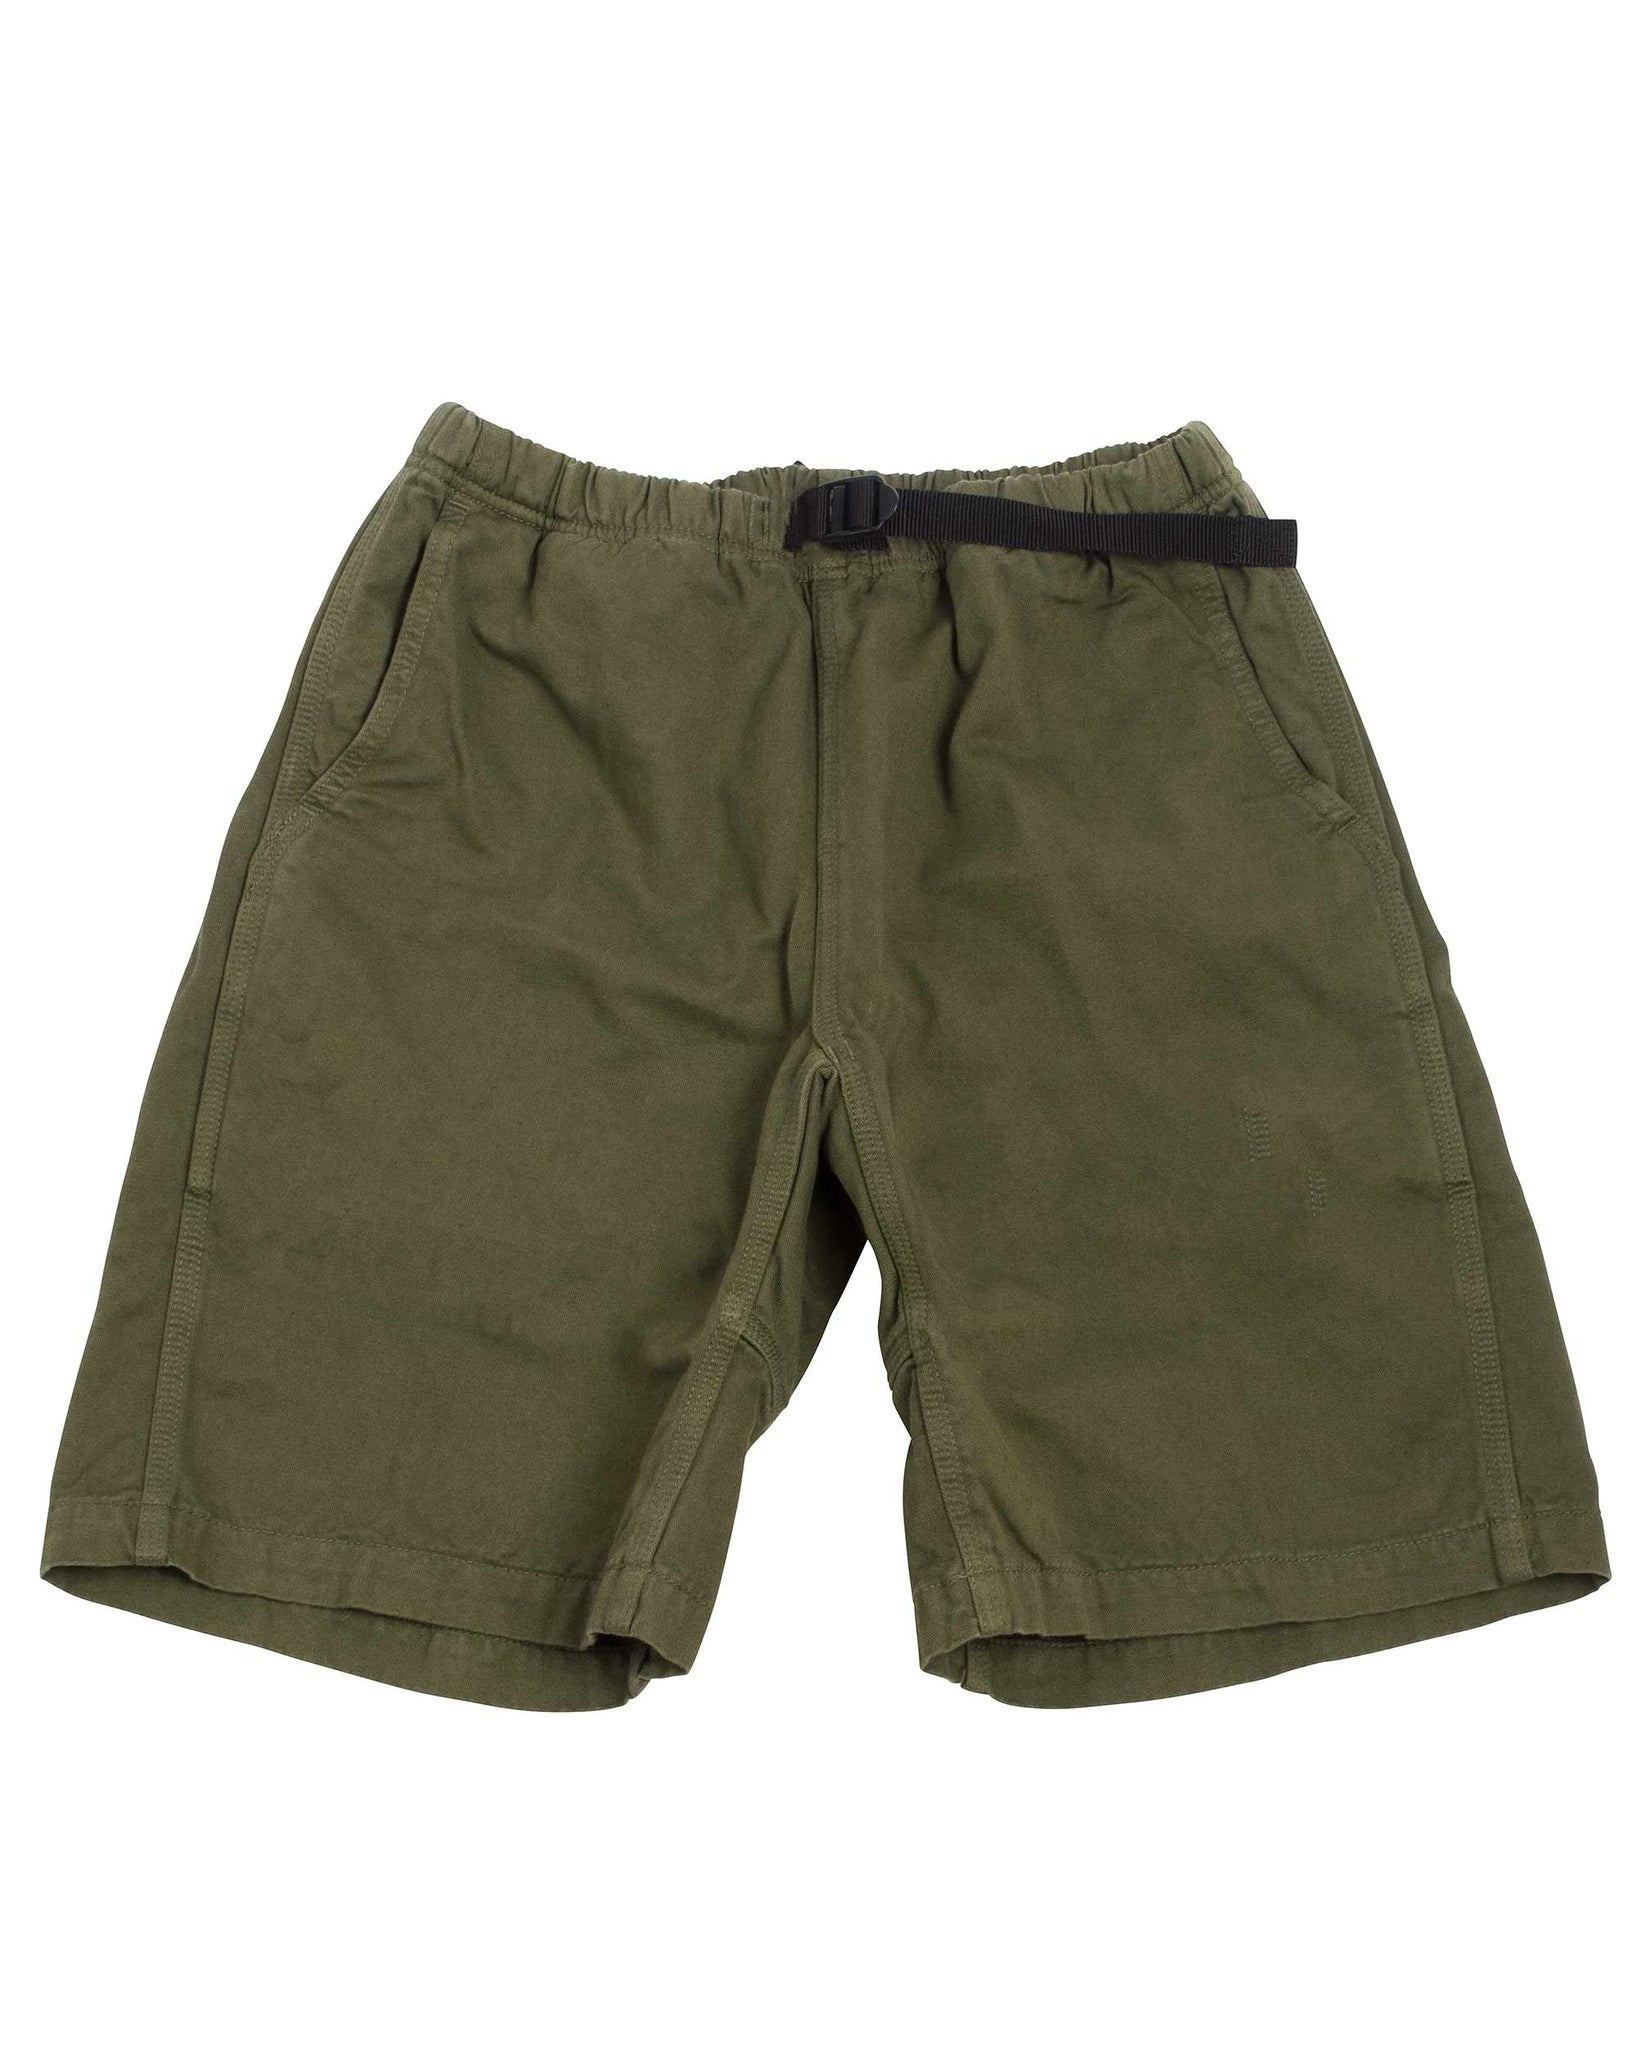 The Real McCoy's MP21017 Climbers' Shorts (Over-Dyed) Olive